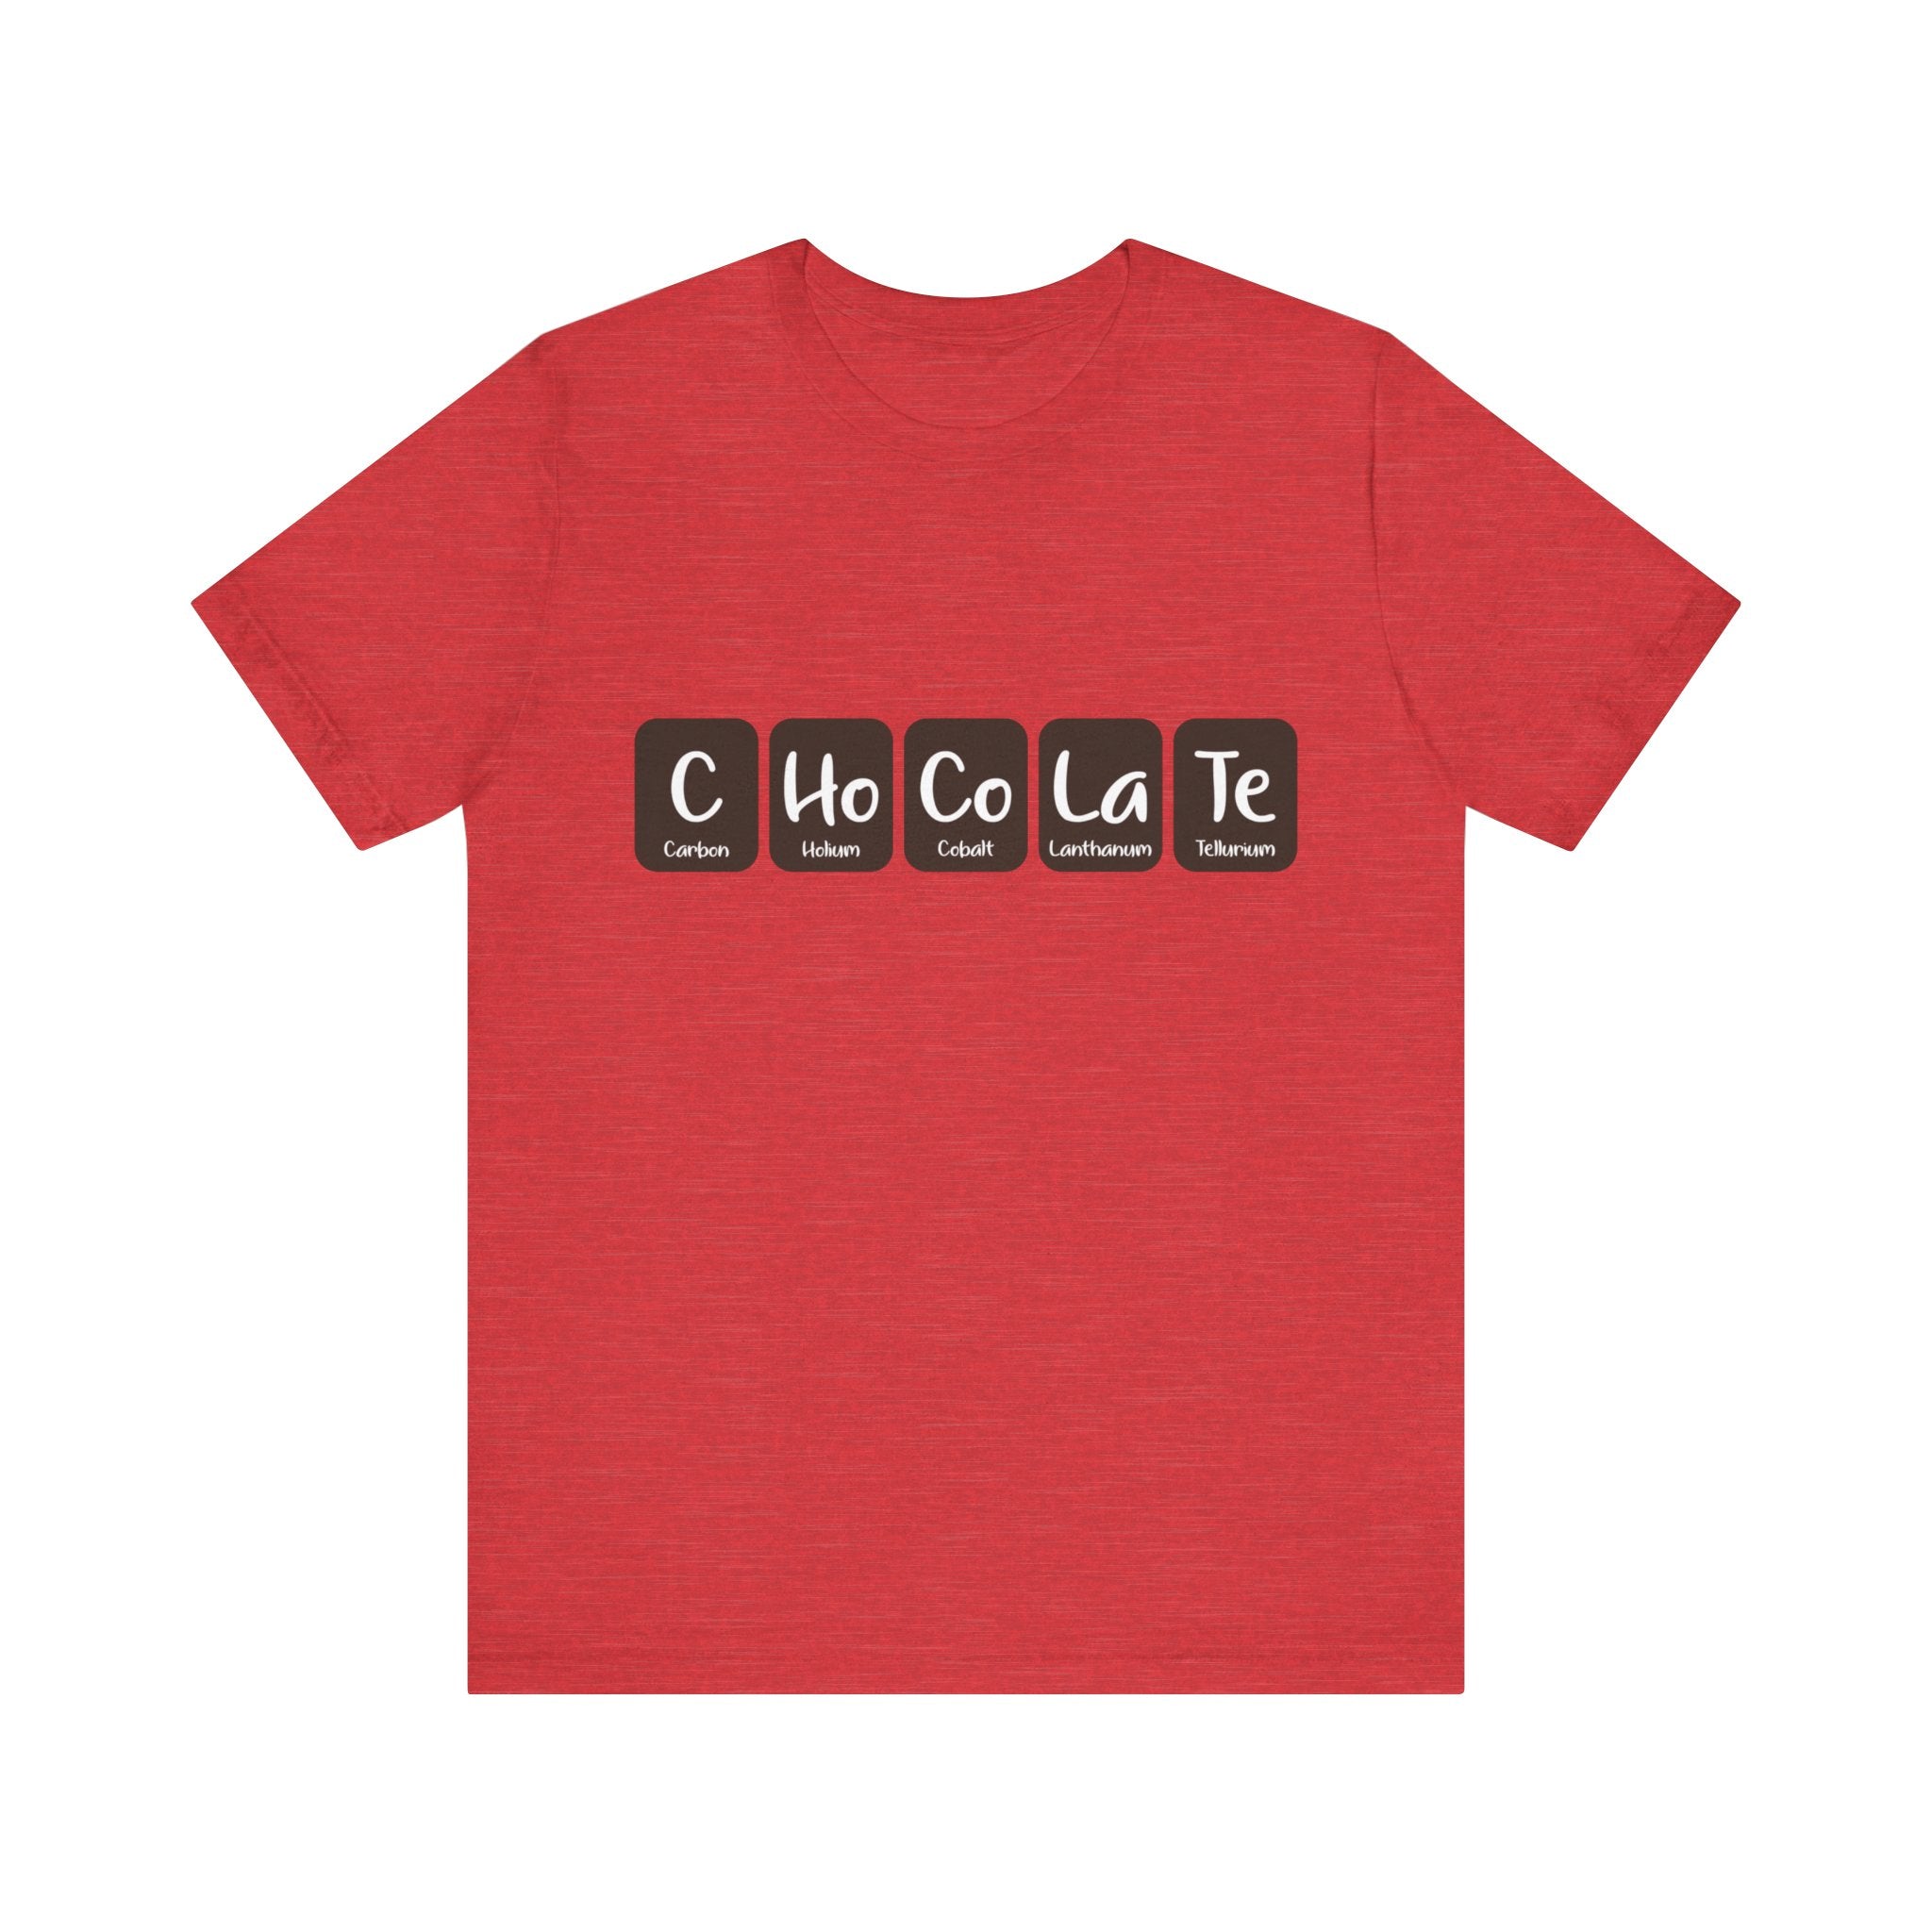 C-Ho-Co-La-Te - T-Shirt with black squares displaying elements from the periodic table, spelling "C Ho Co La Te." Crafted from soft combed and ring-spun cotton, this design t-shirt celebrates your love for chocolate in style.